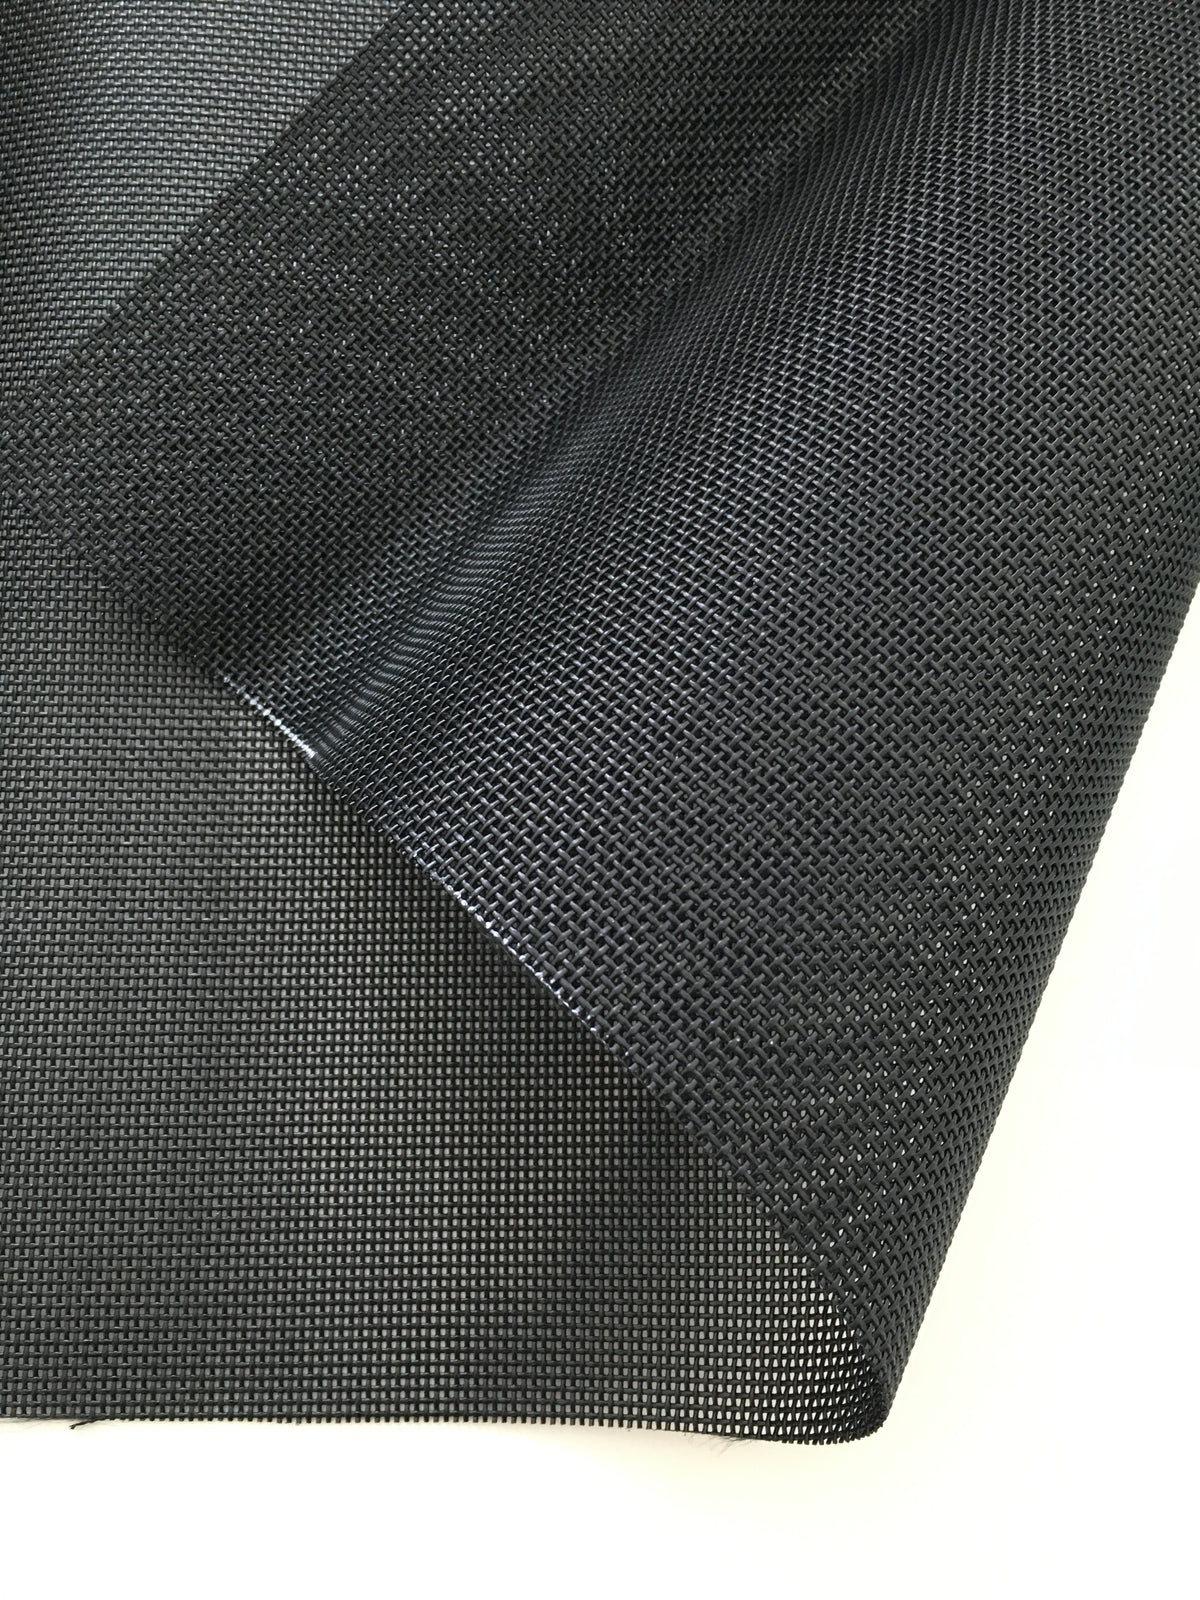 RETEX FABRIC POLYESTER 100% TWO SIDE COATED